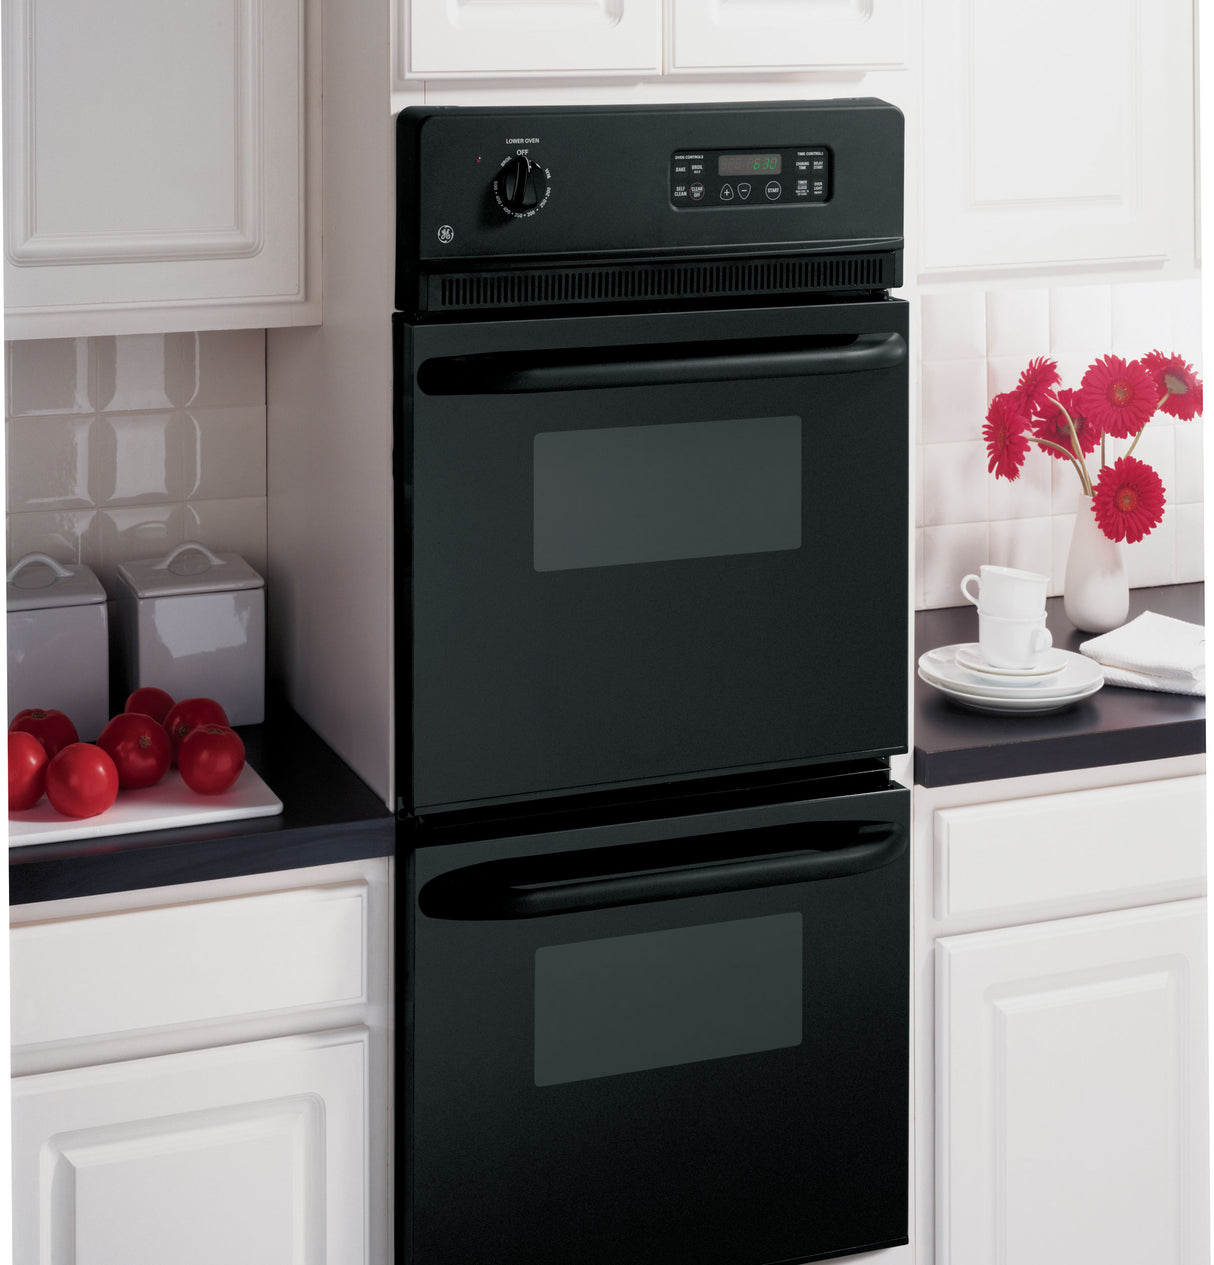 GE(R) 24" Double Wall Oven - (JRP28BJBB)